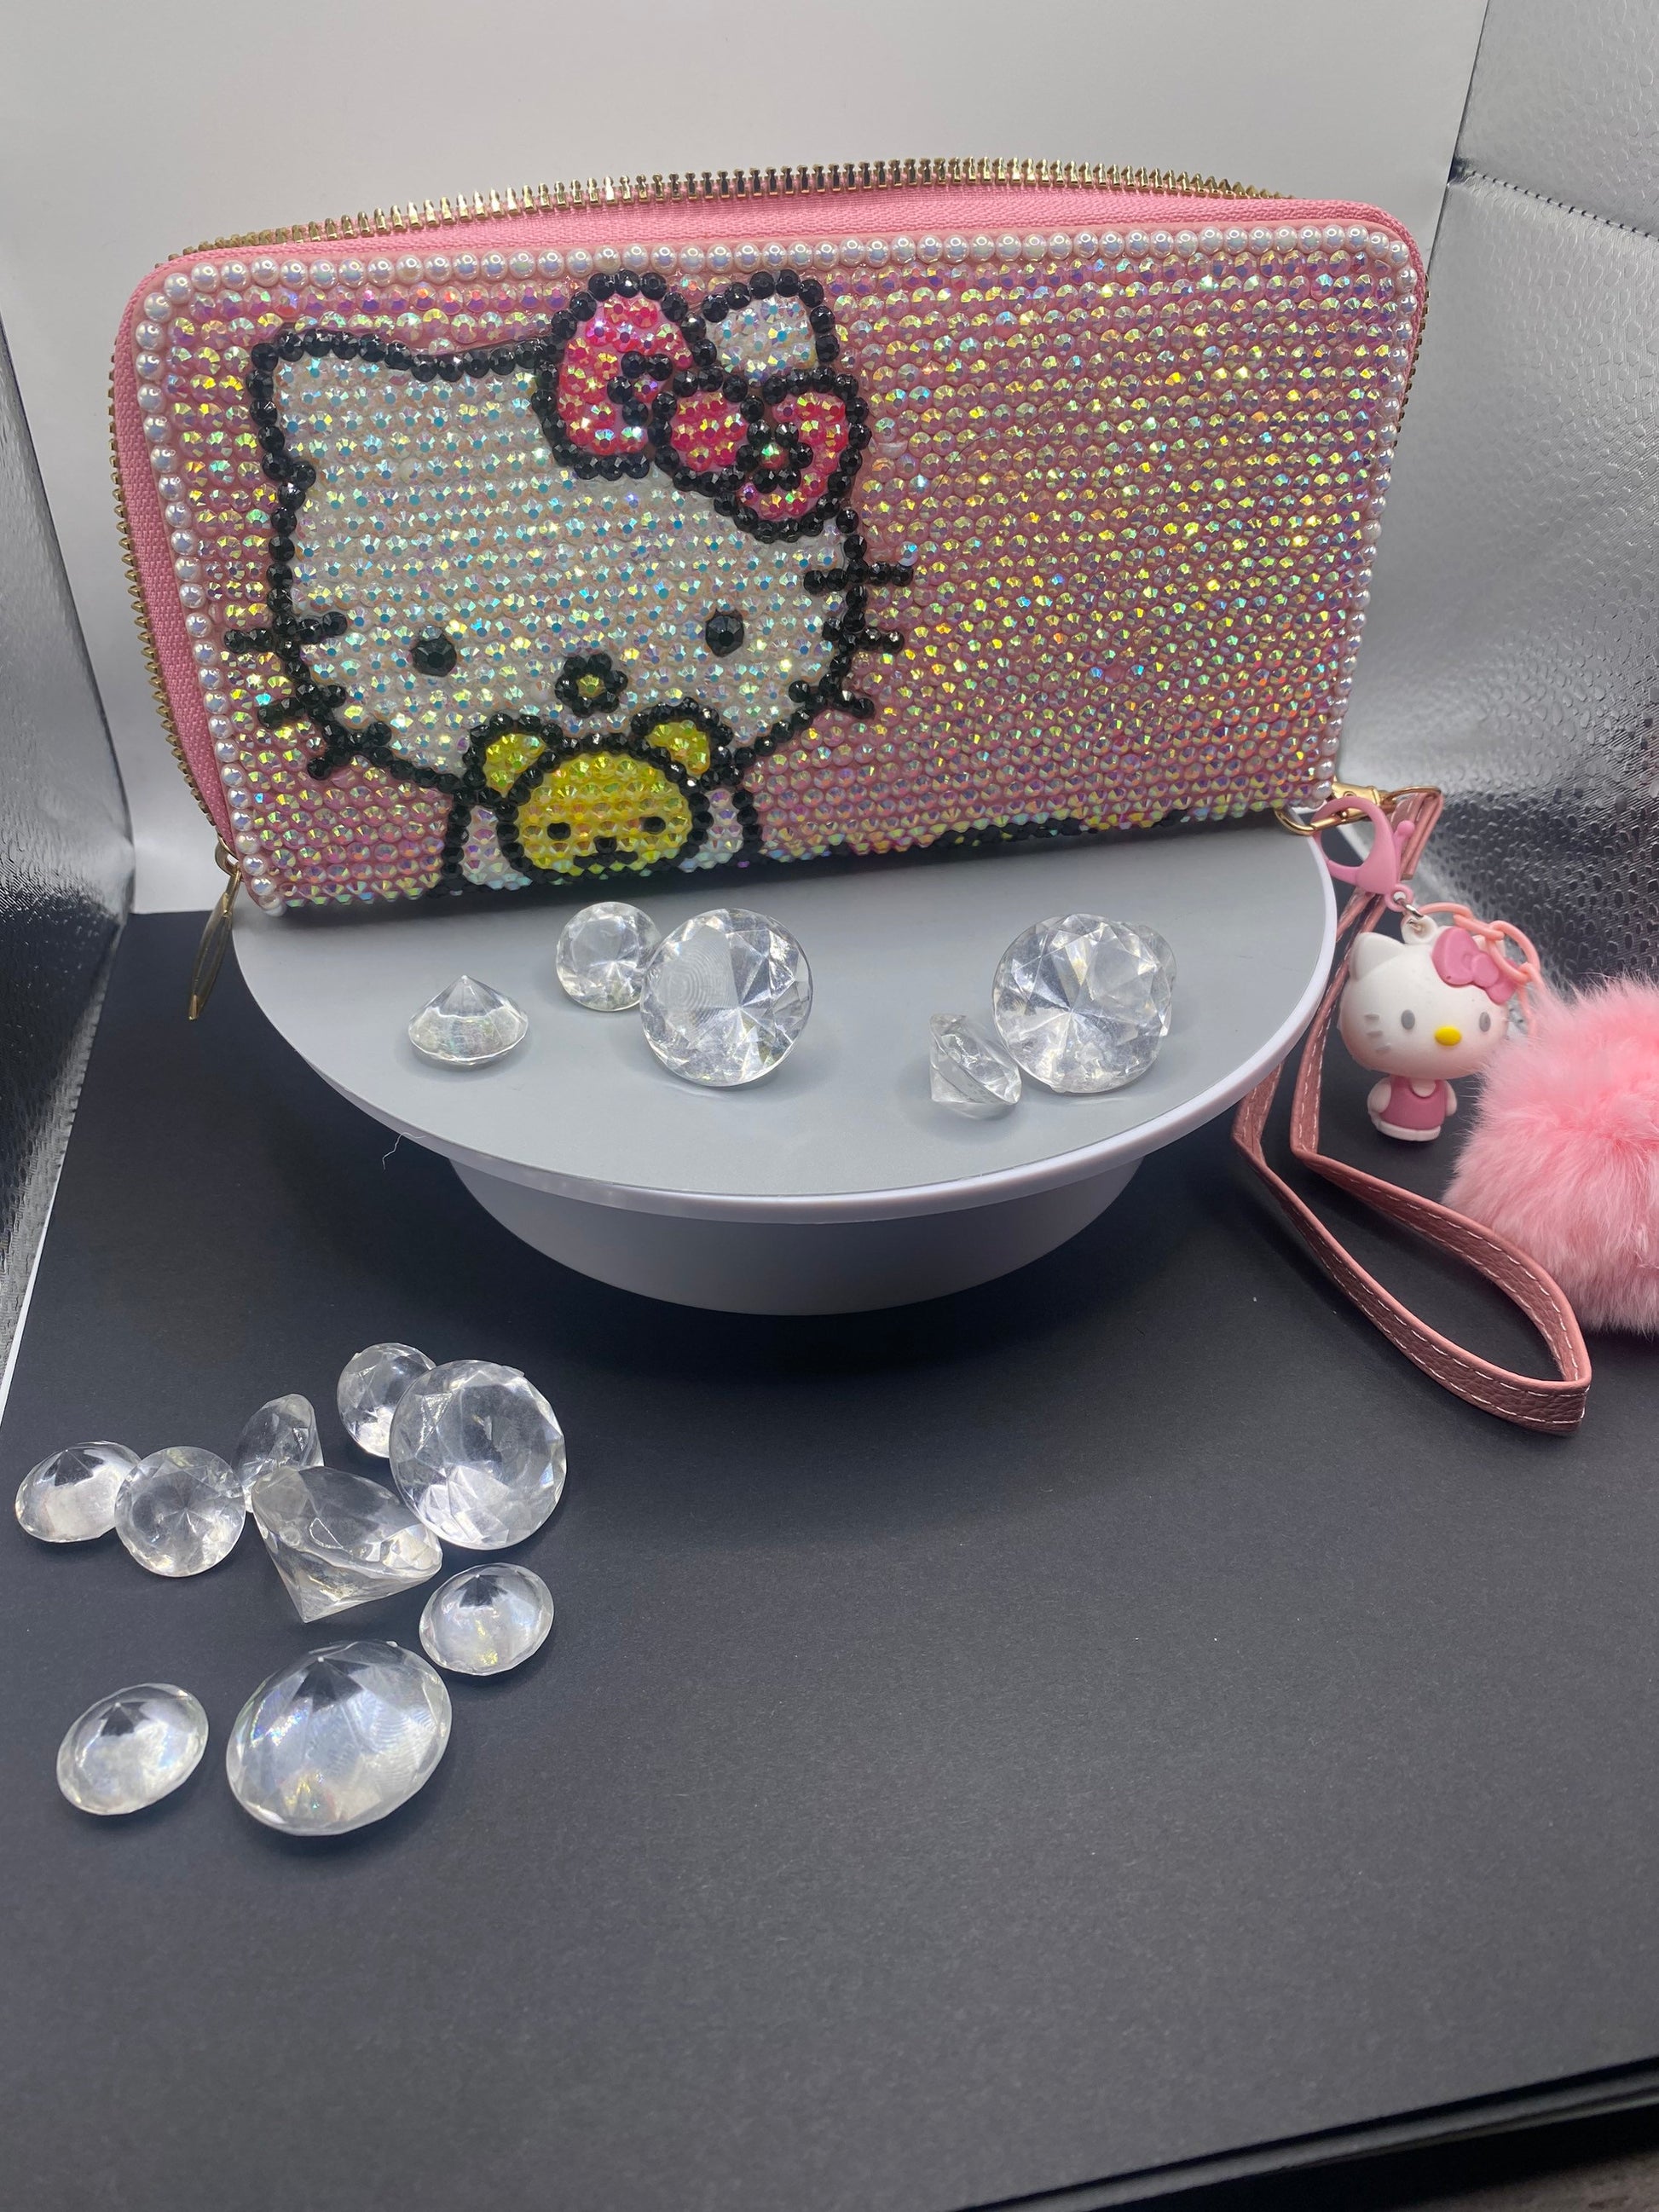 Kitty | bling| crystals | gifts for her| Kuromi | long wallet | kawaii | Pink diamonds | encrusted| Sanriod | pastel | clutch